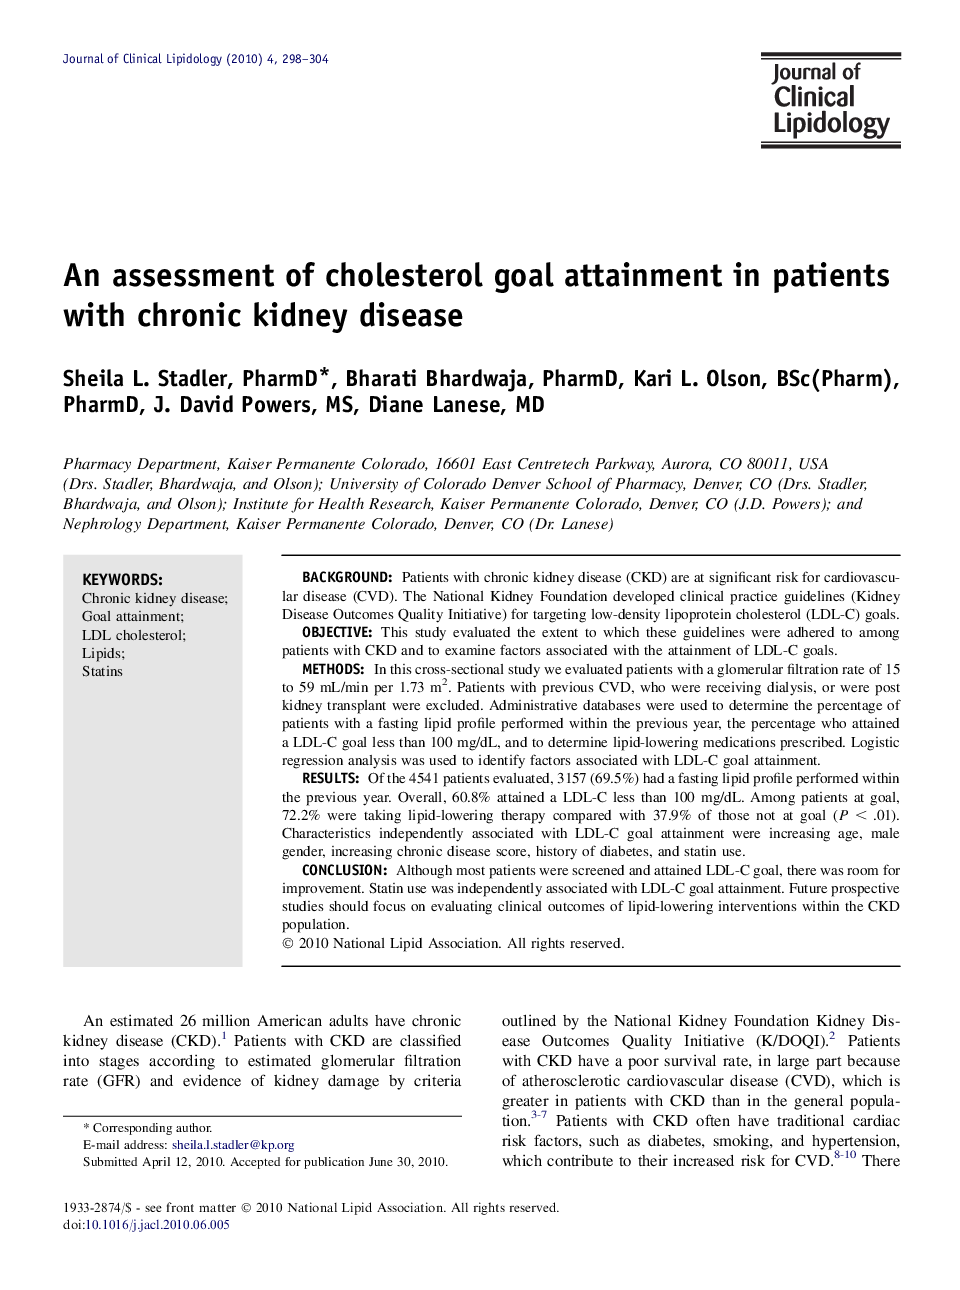 An assessment of cholesterol goal attainment in patients with chronic kidney disease